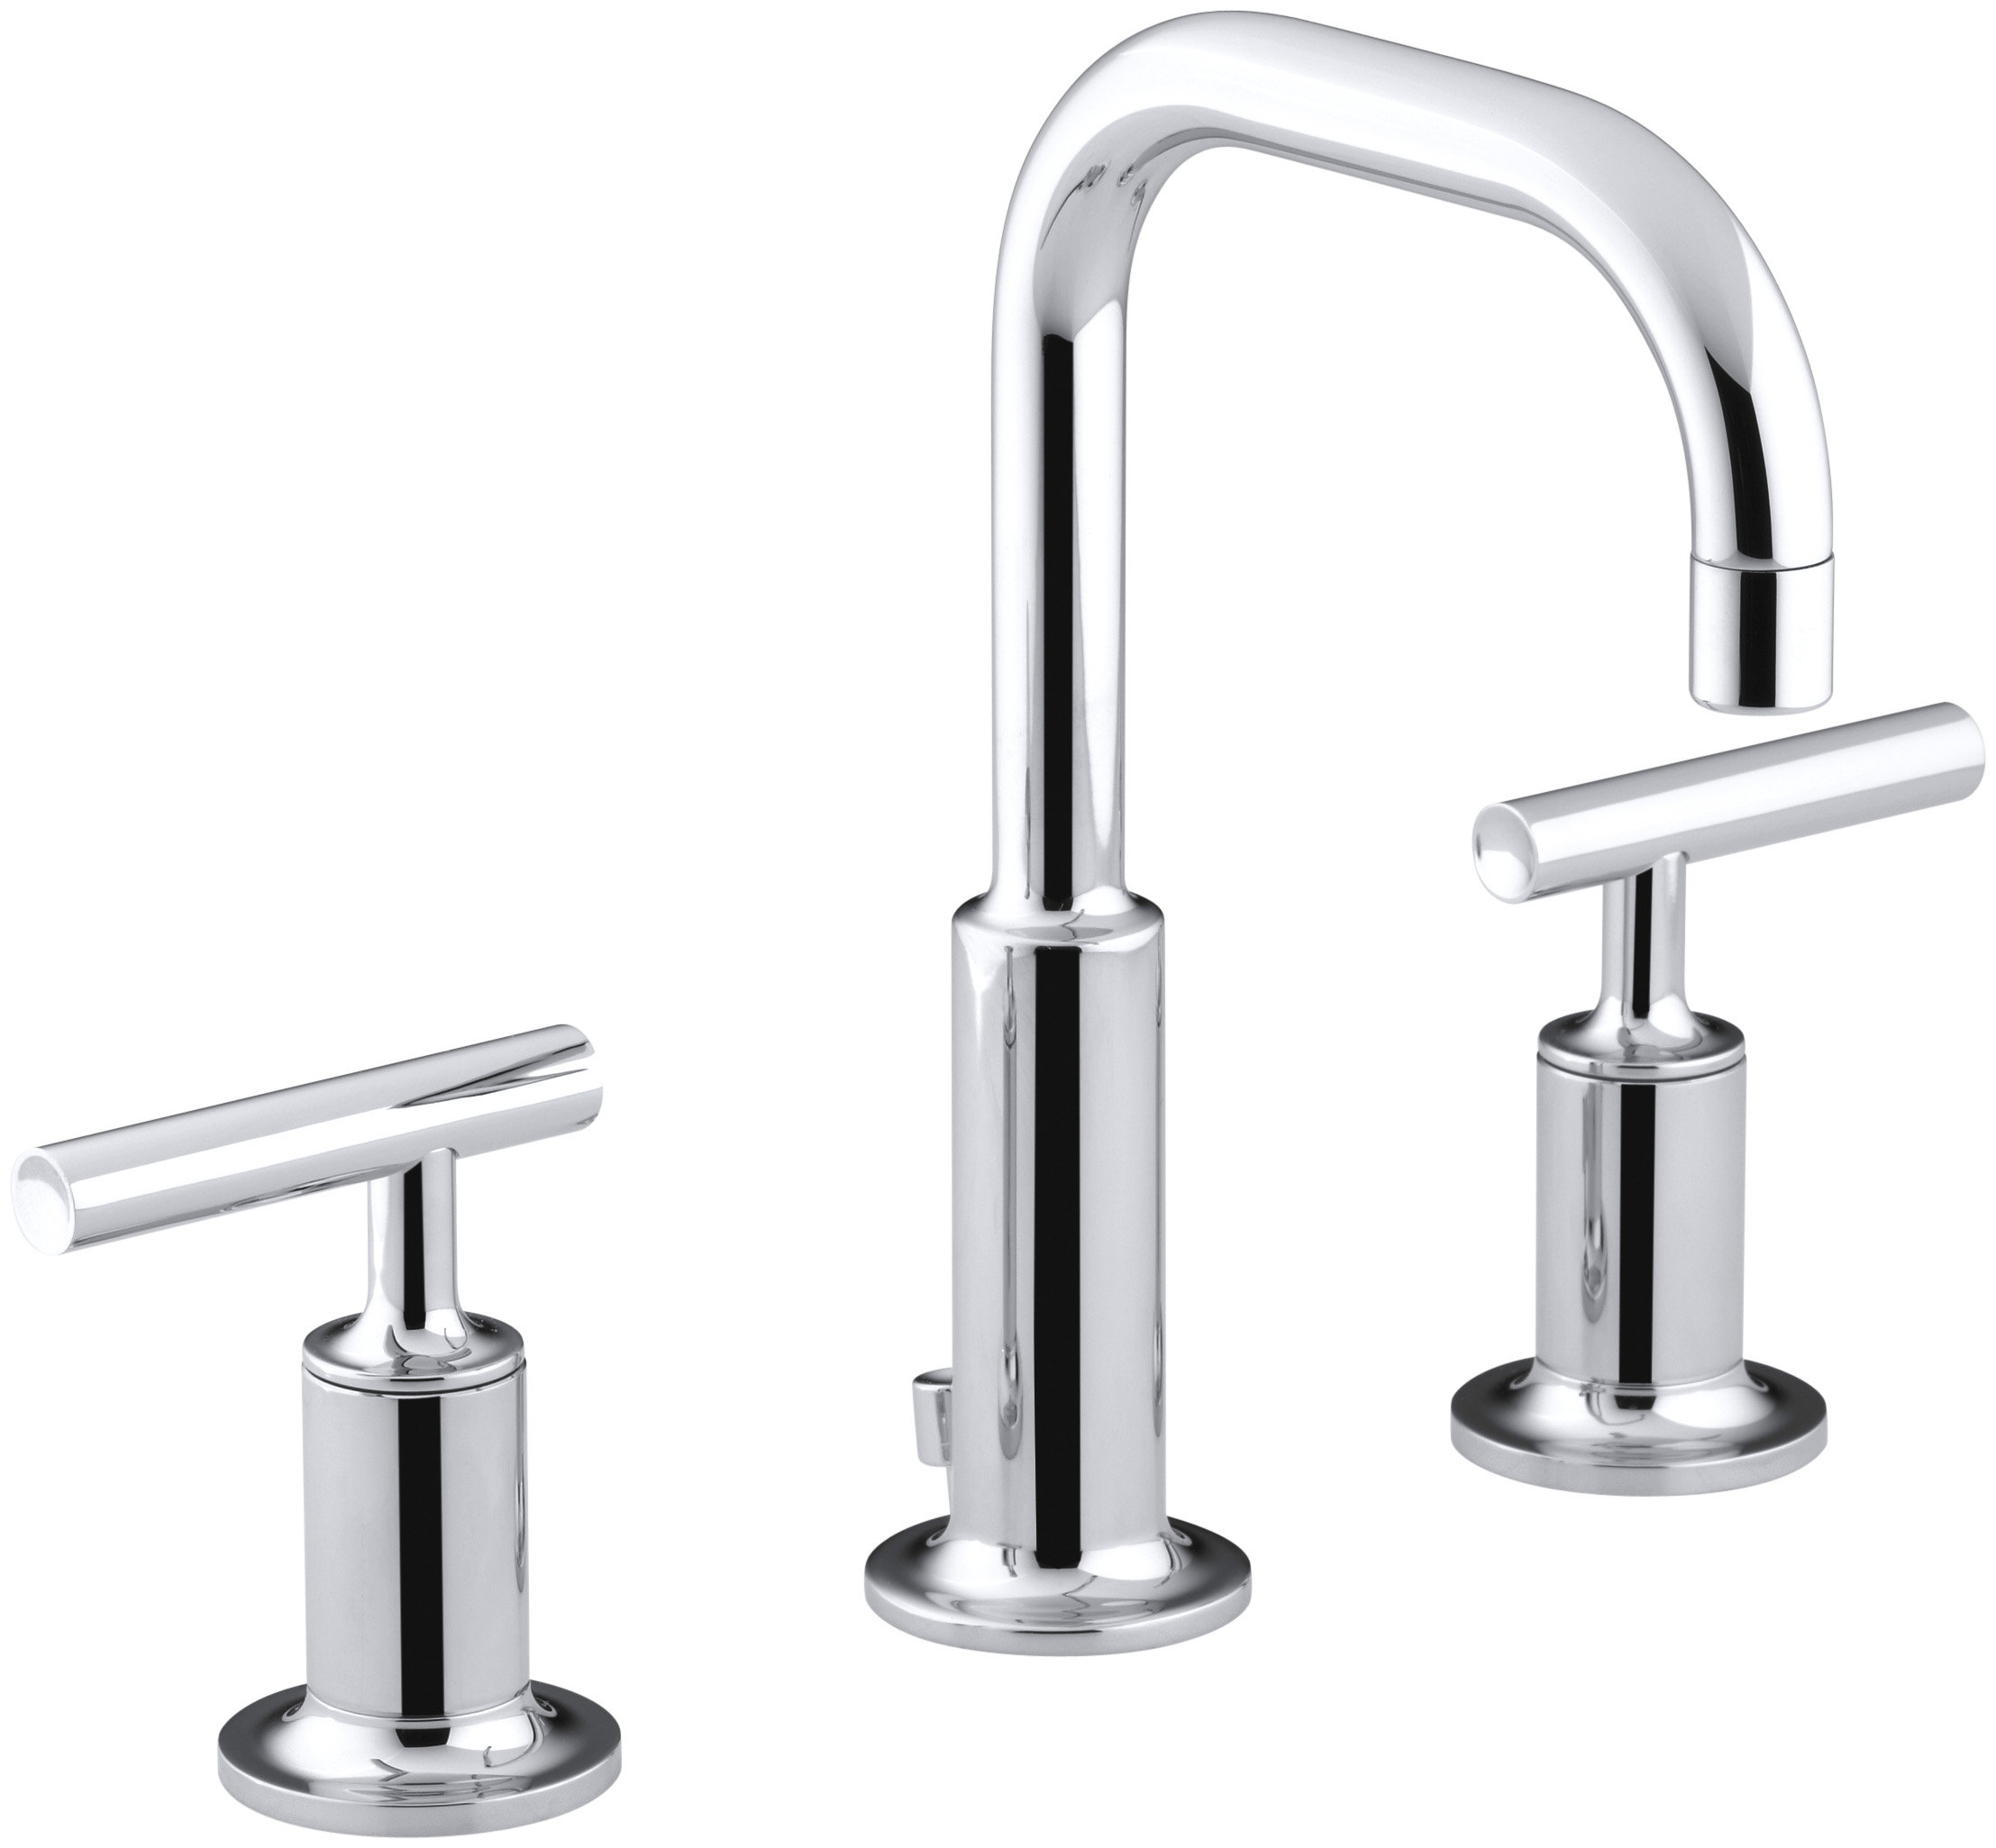 Purist Widespread Bathroom Faucet With Drain Assembly Reviews Allmodern